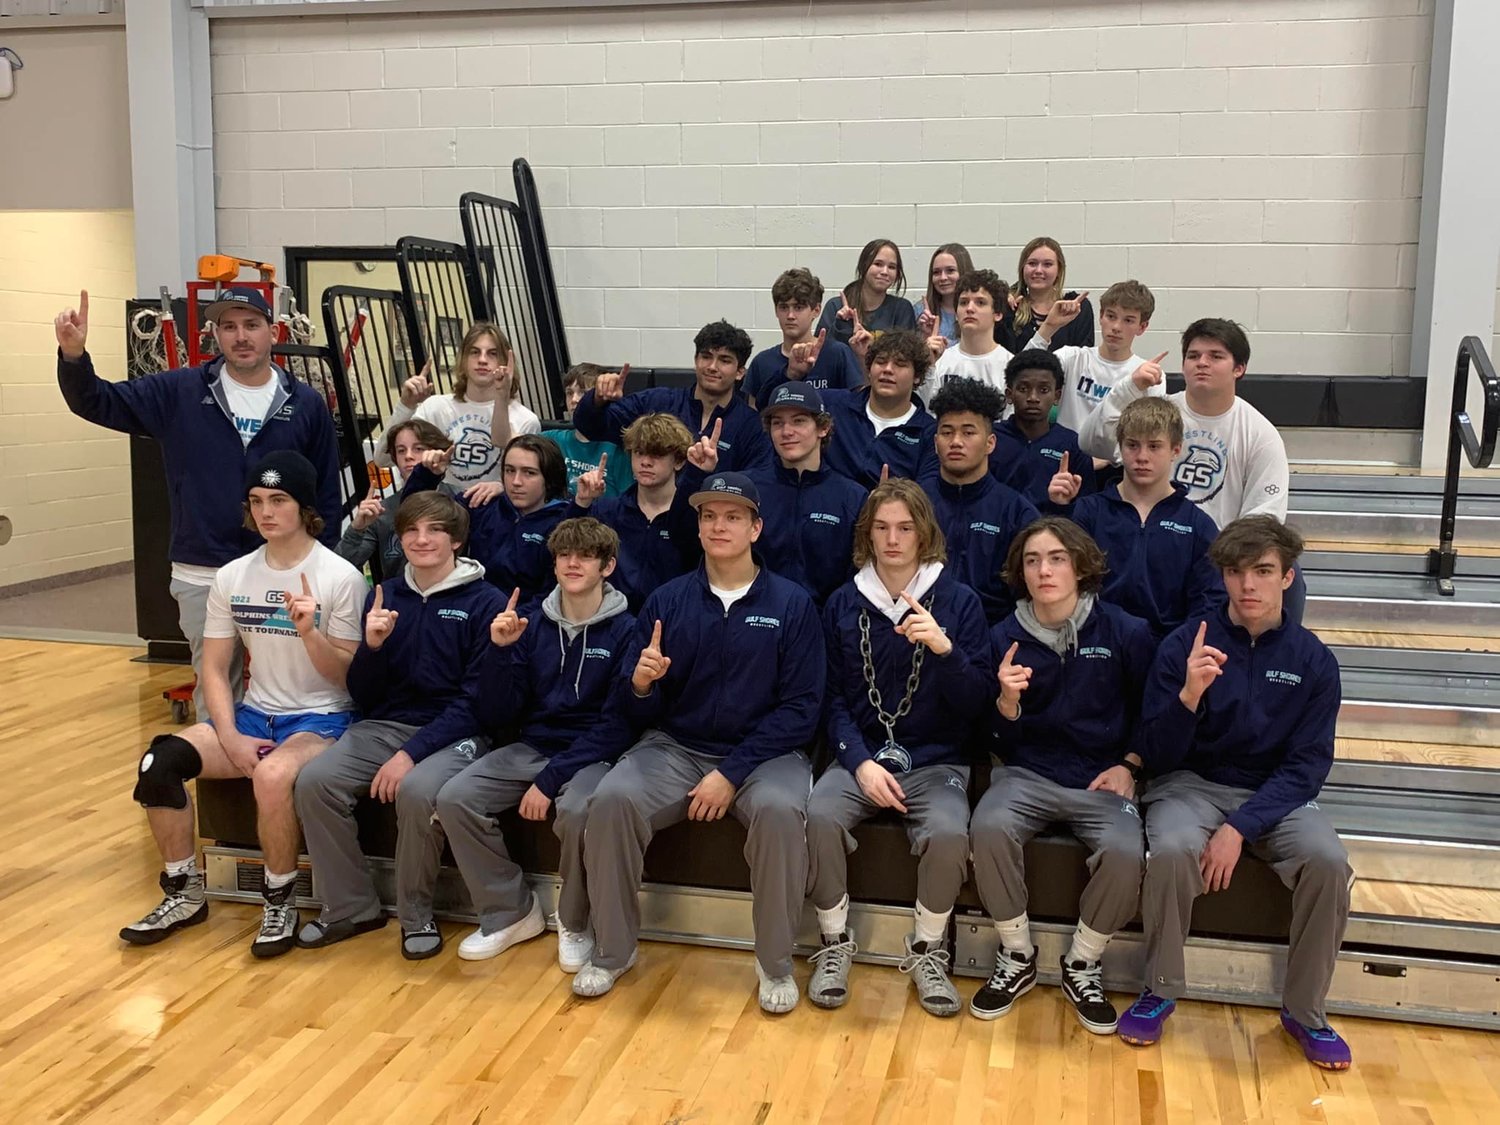 Gulf Shores High School wrestling team was named the AHSAA 5A-6A Region 1 Champions at the Region 1 Championship in Saraland Jan. 4.